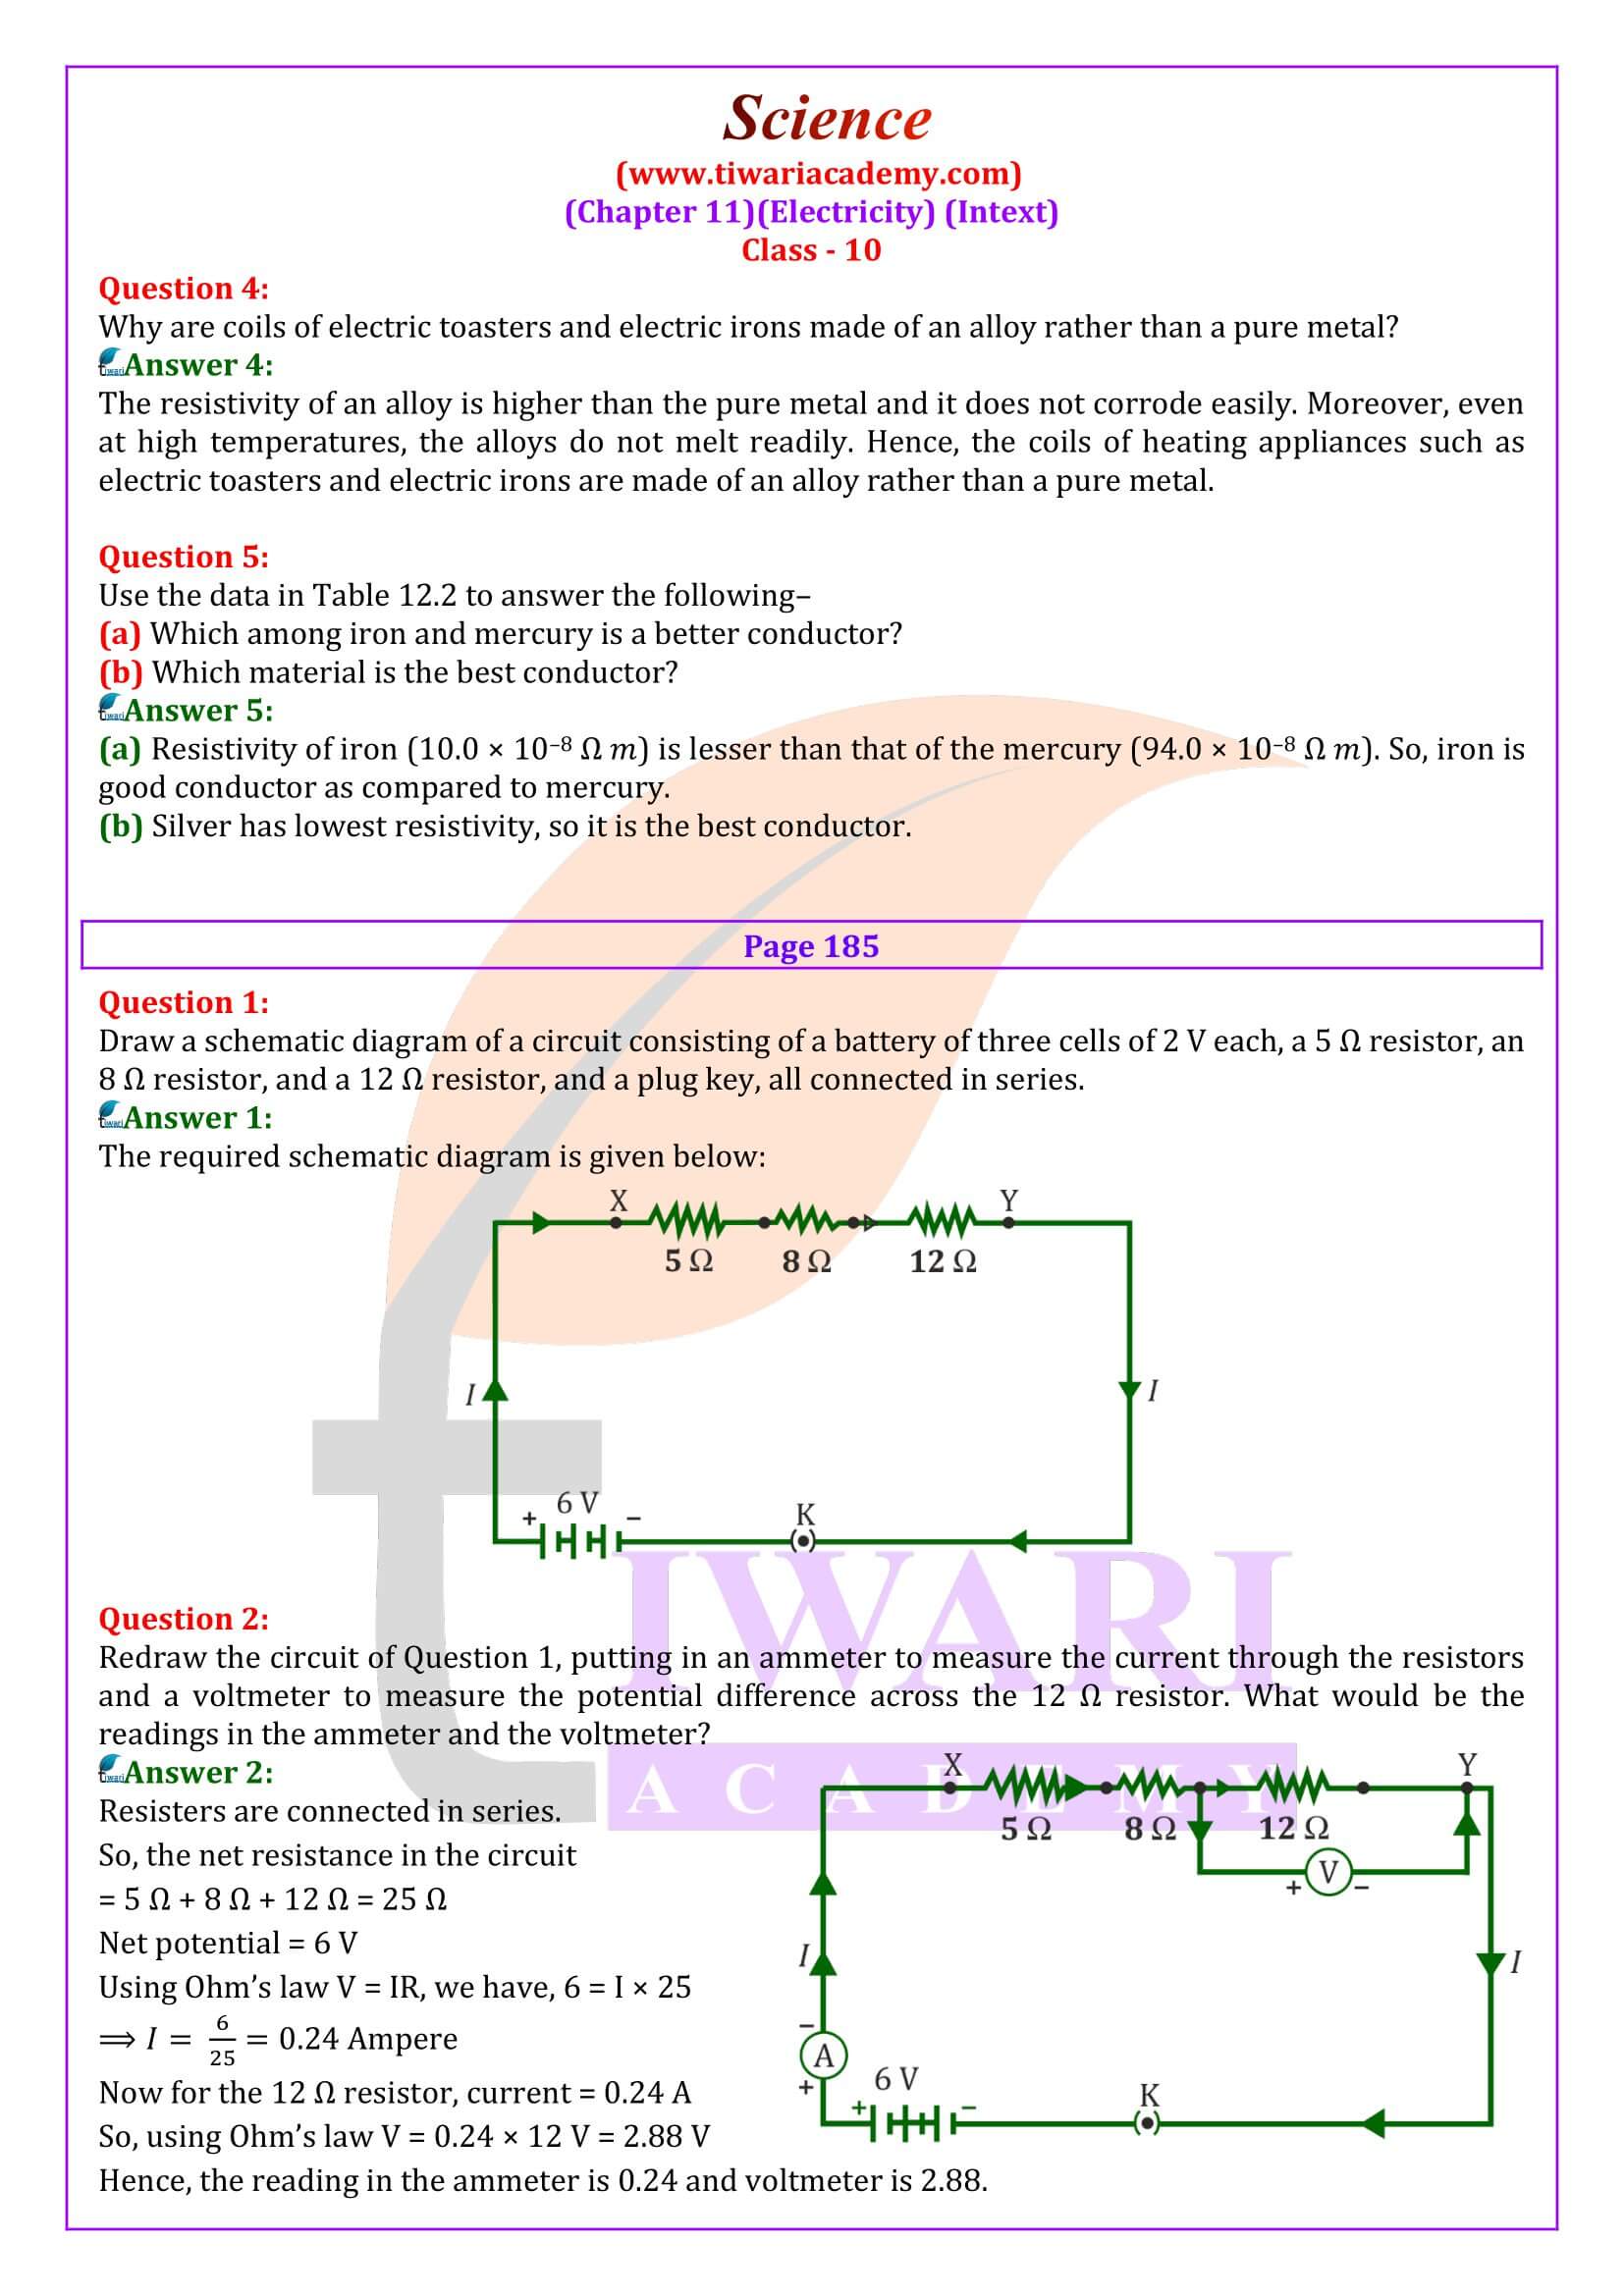 NCERT Solutions for Class 10 Science Chapter 11 Intext answers